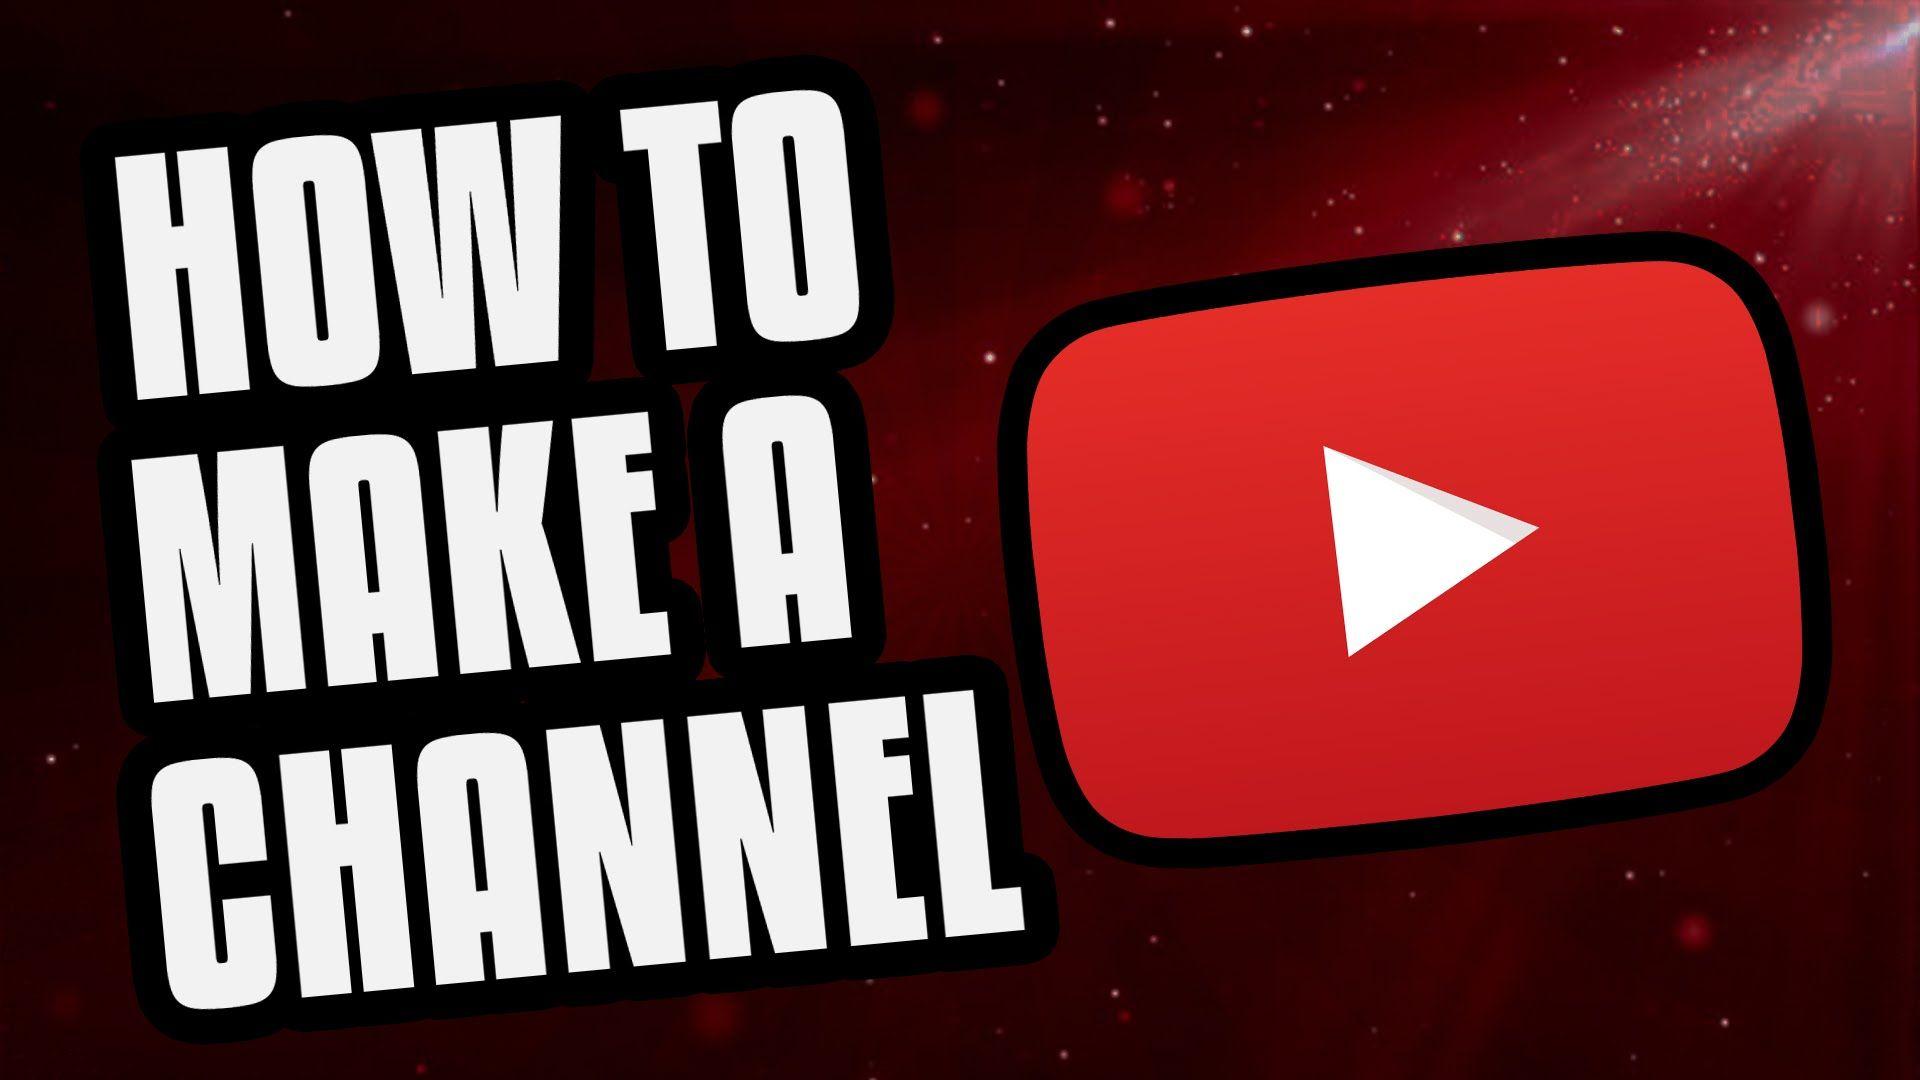 2016 New YouTube Logo - How To Make A YouTube Channel! (2019 Beginners Guide)